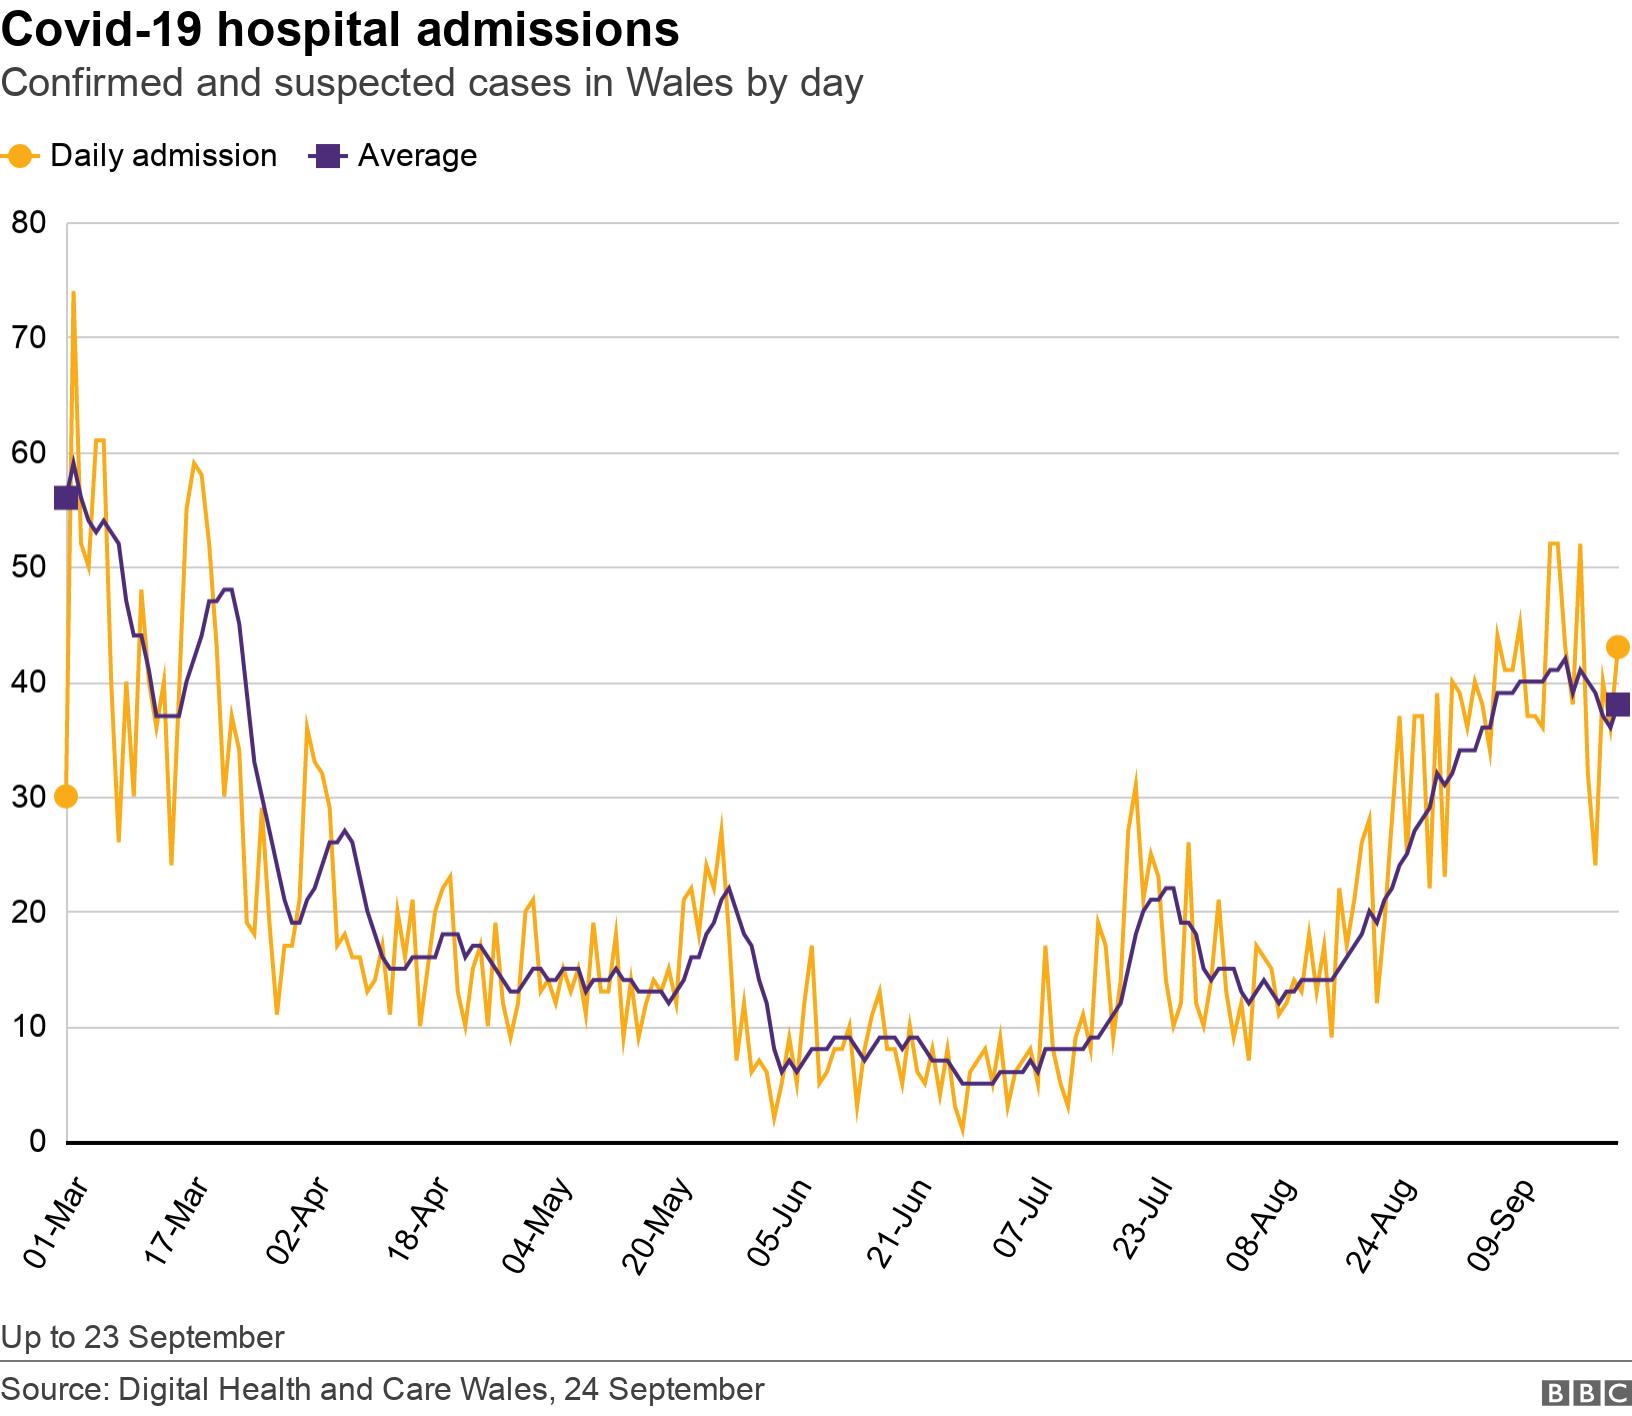 Covid-19 hospital admissions. Confirmed and suspected cases in Wales by day.  Up to 23 September.